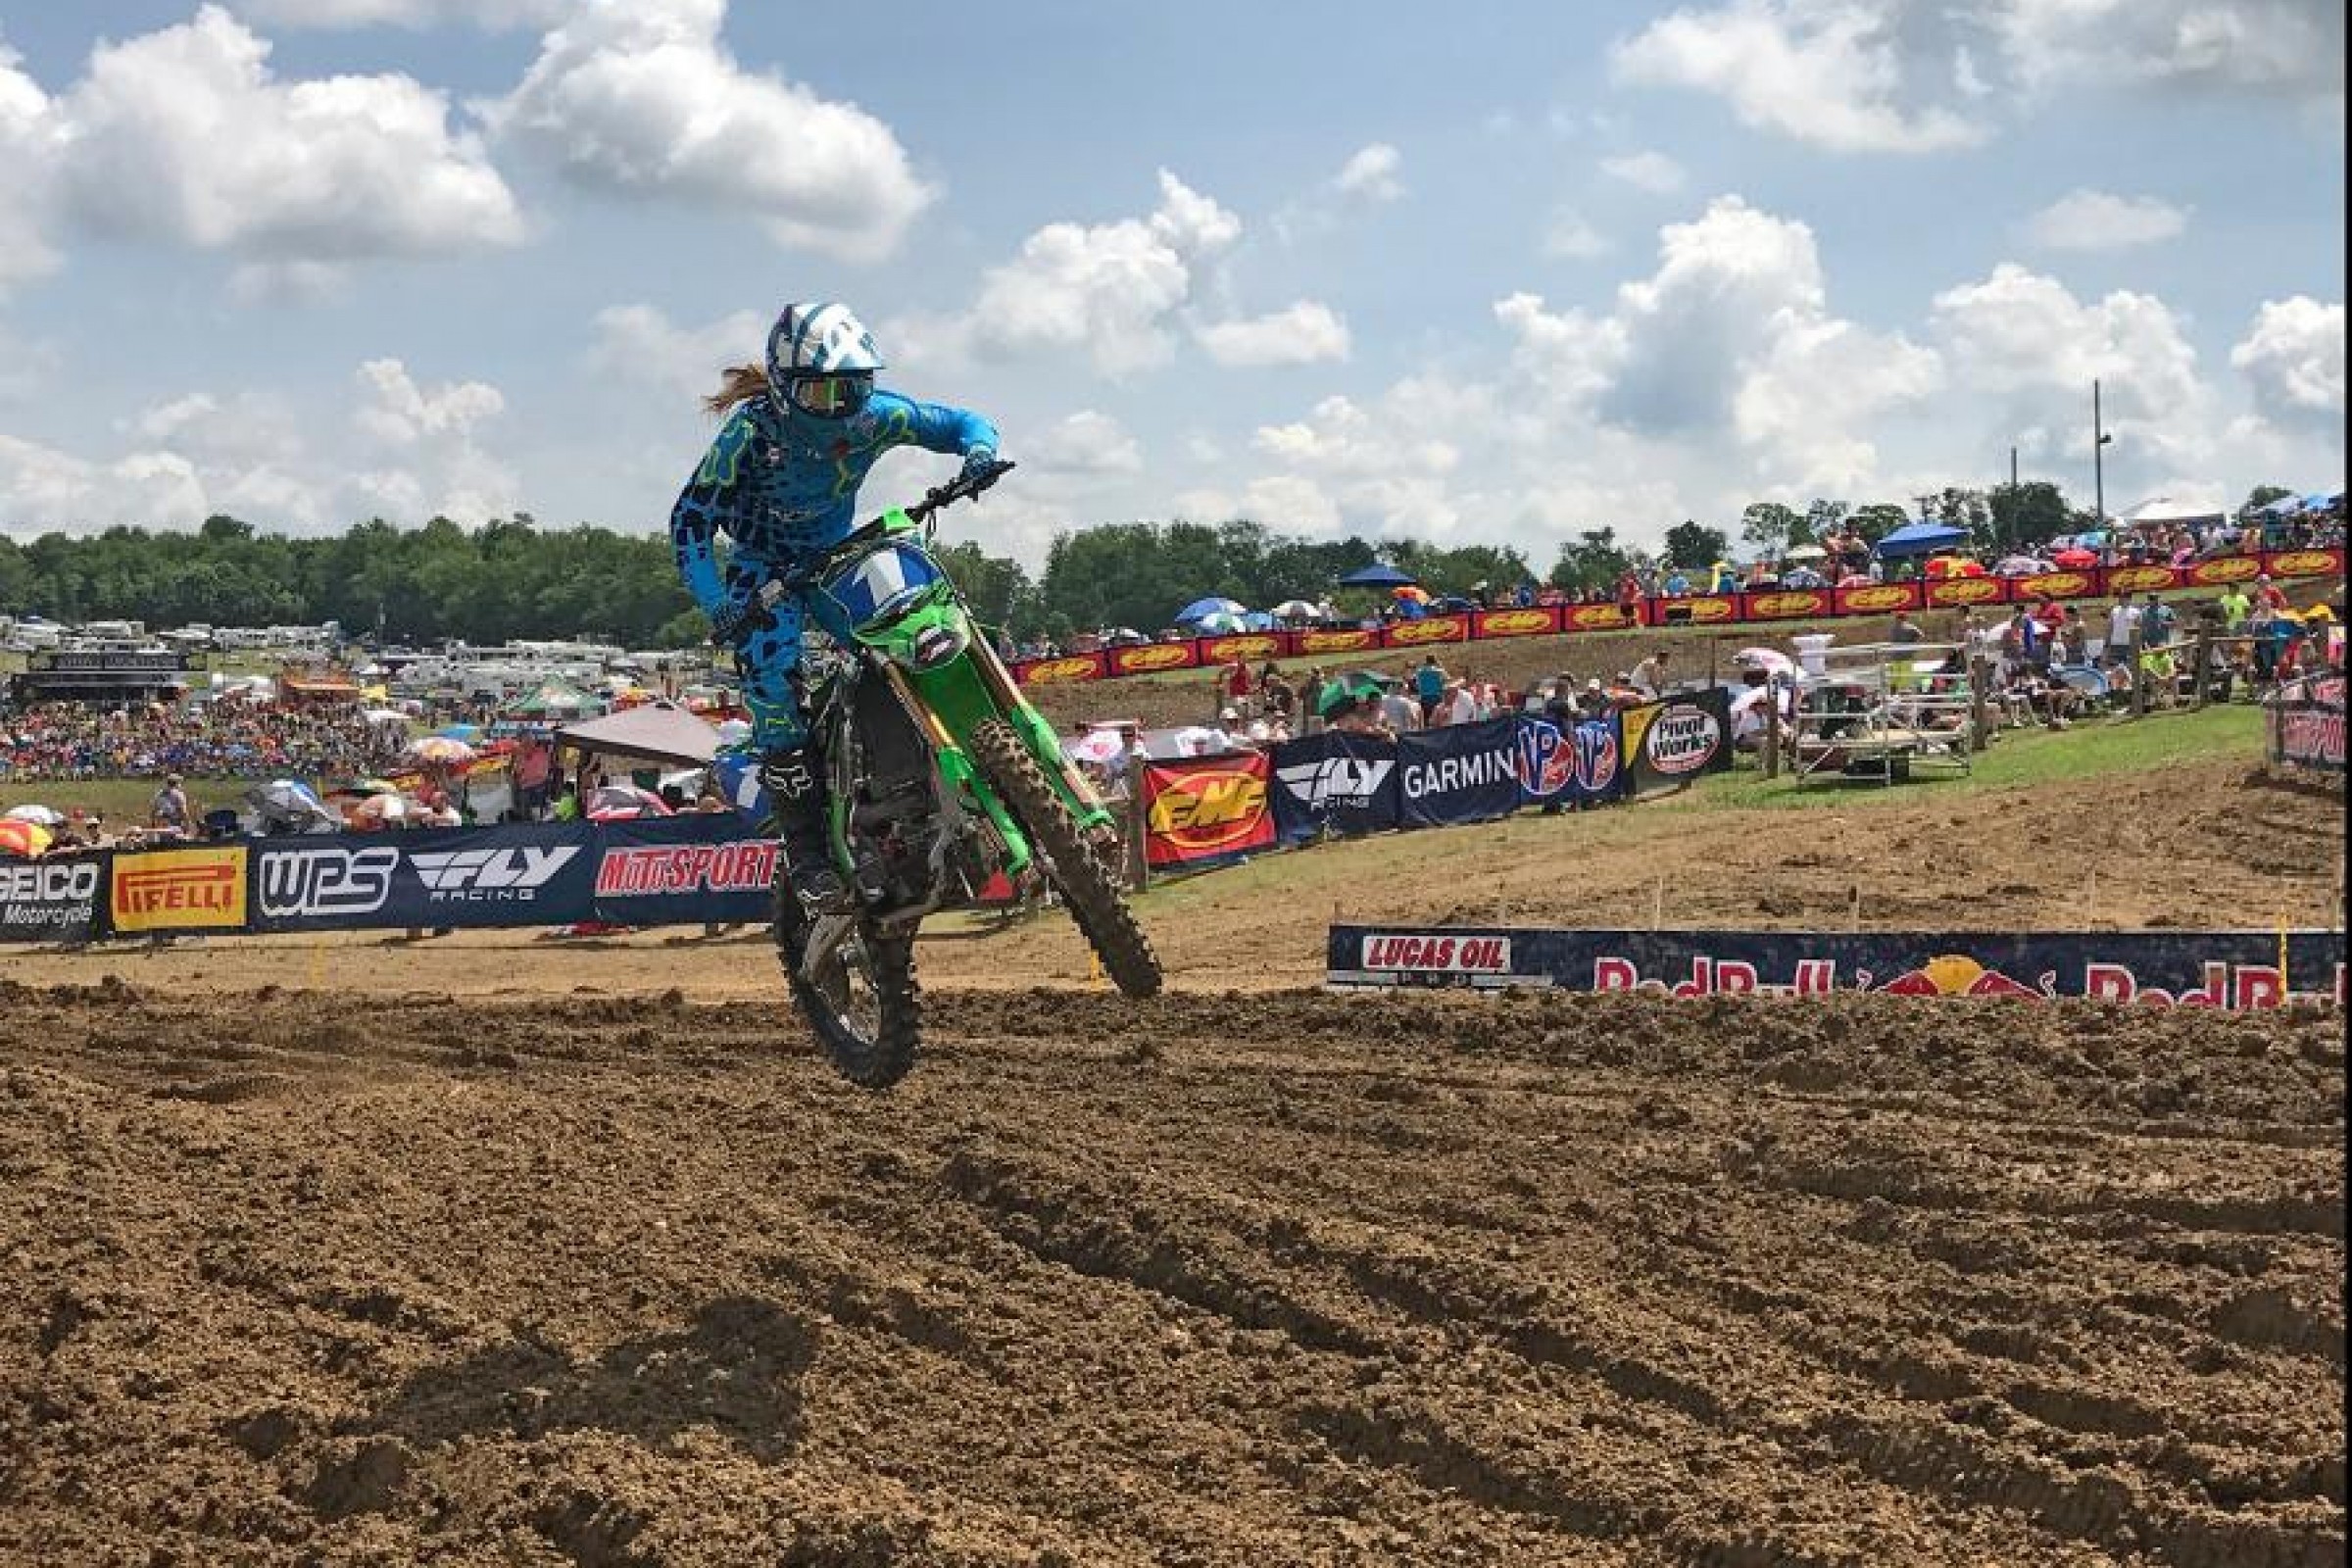 Kylie Fasnacht Clinches WMX Championship at High Point